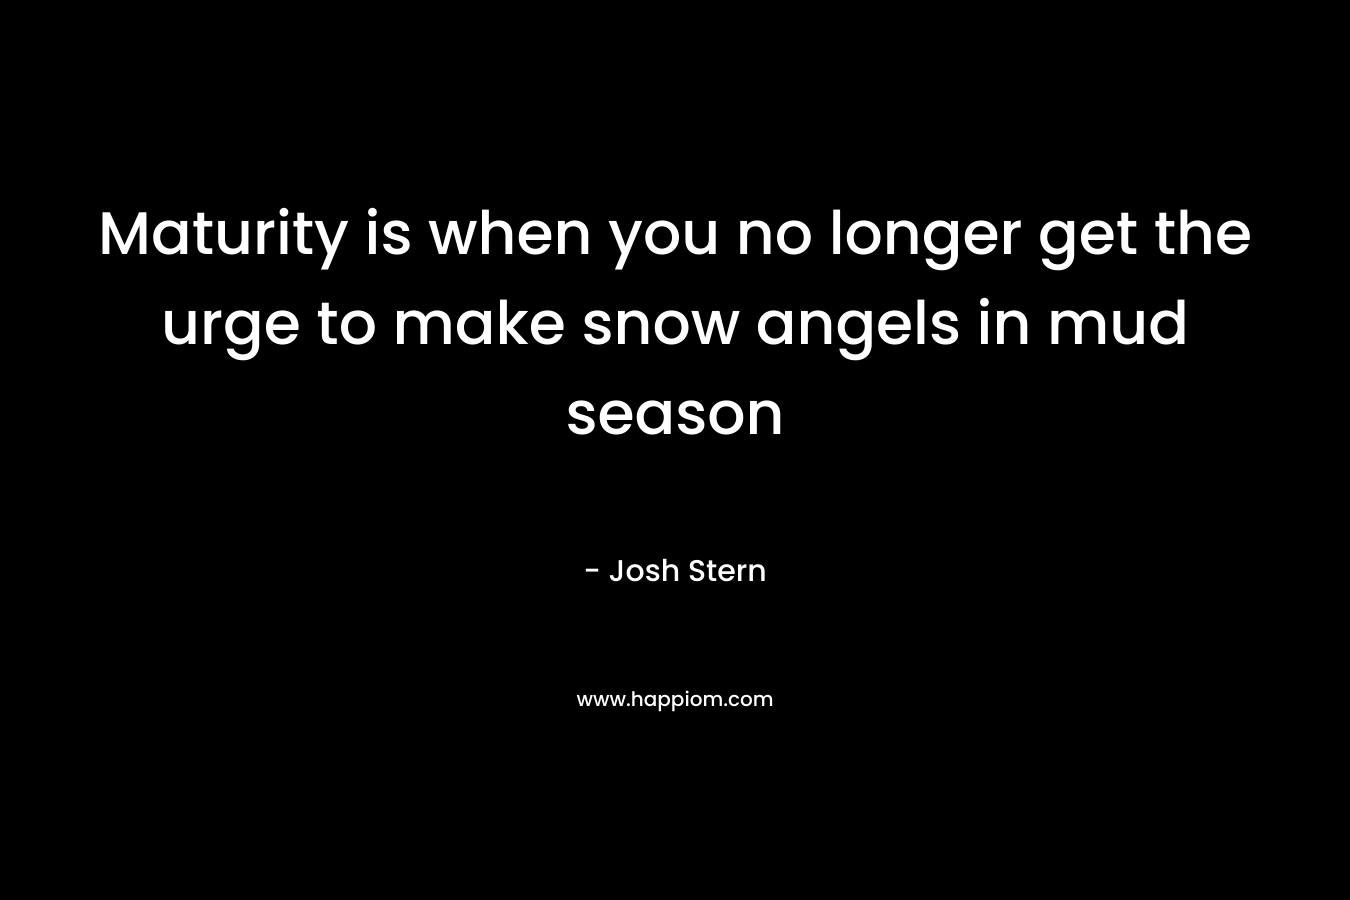 Maturity is when you no longer get the urge to make snow angels in mud season